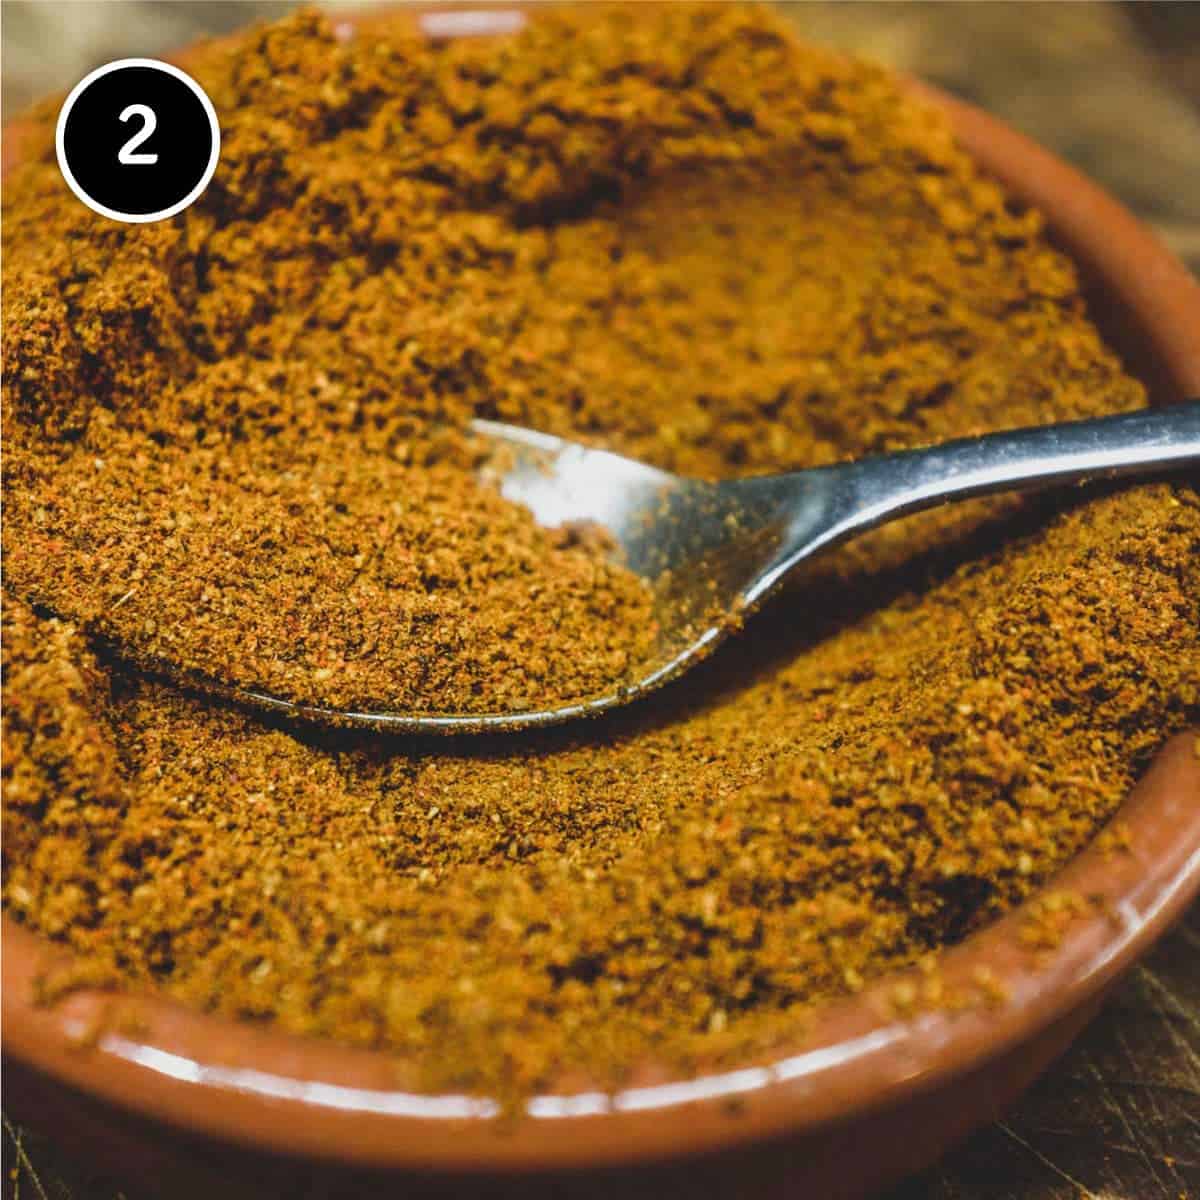 A finely ground curry powder for Keralan Chicken Curry (Nadan Khozi)